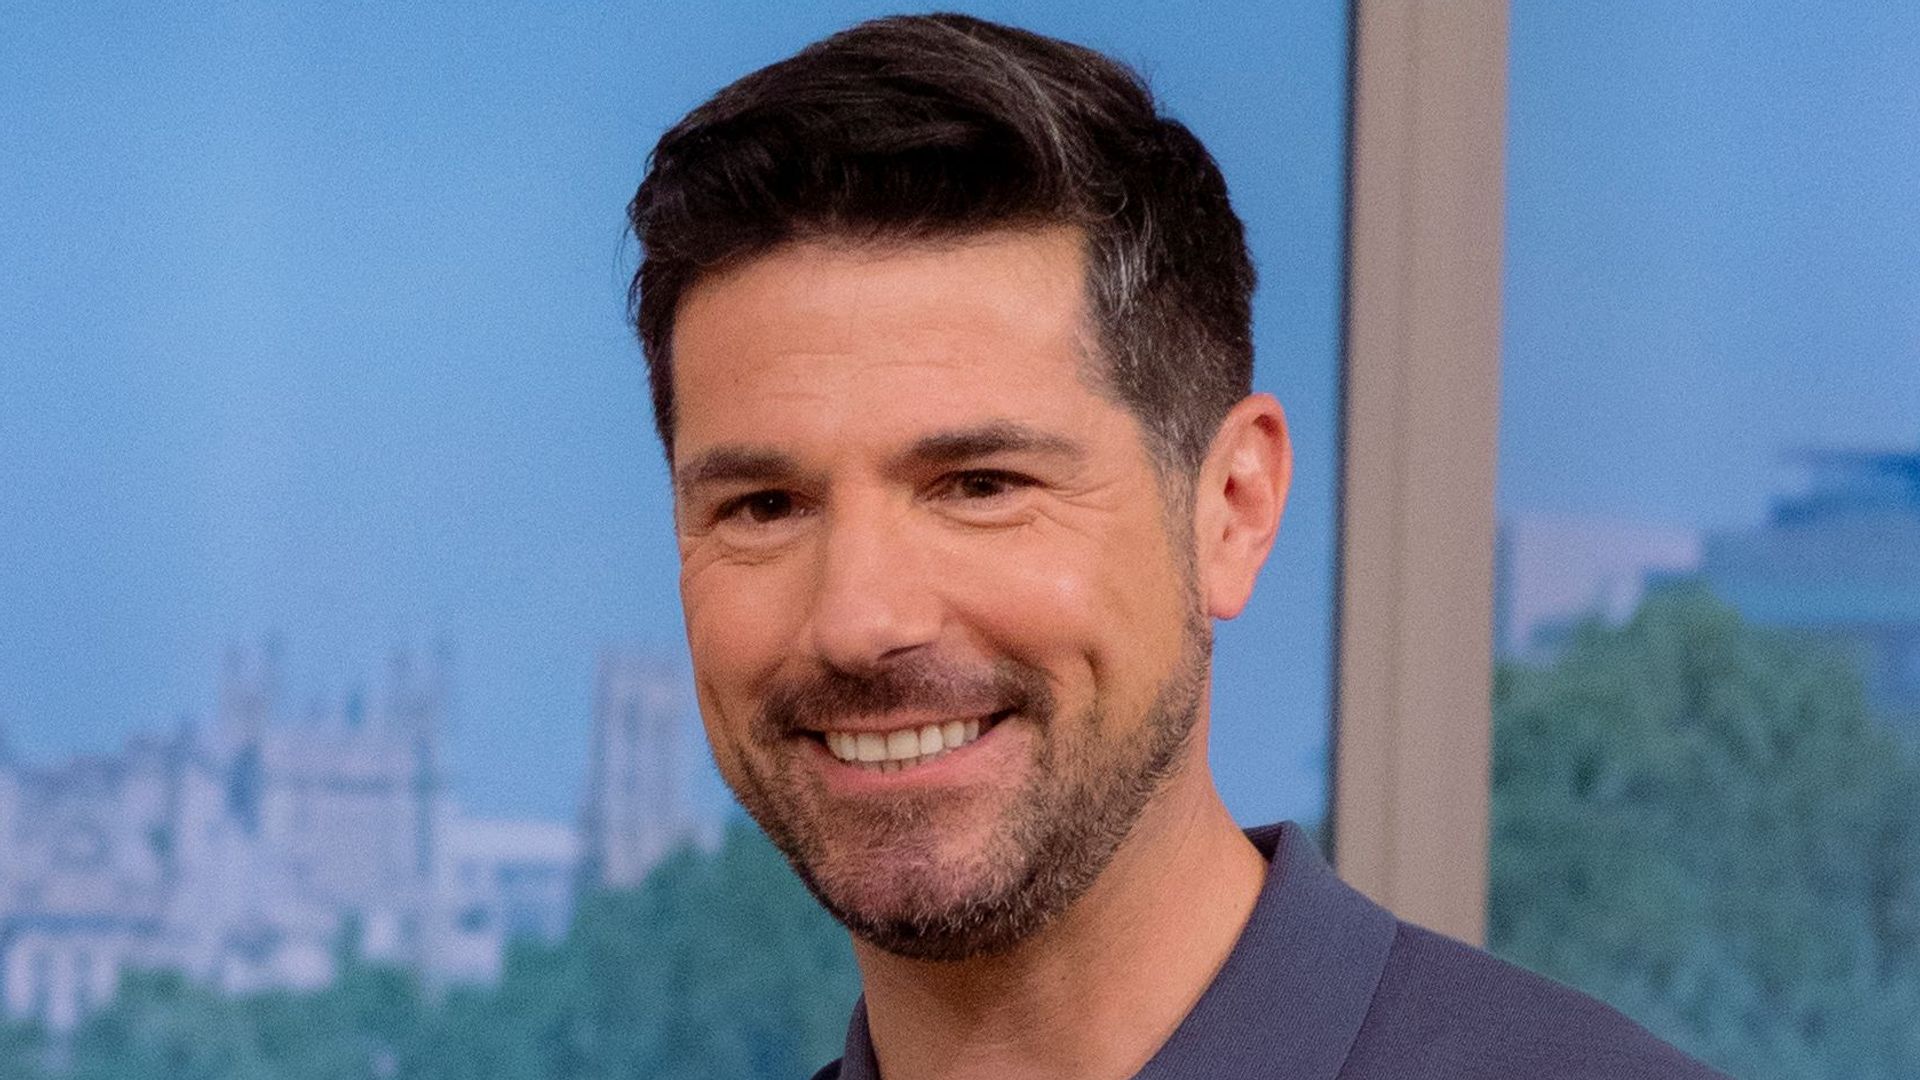 Craig Doyle smiles while hosting This Morning